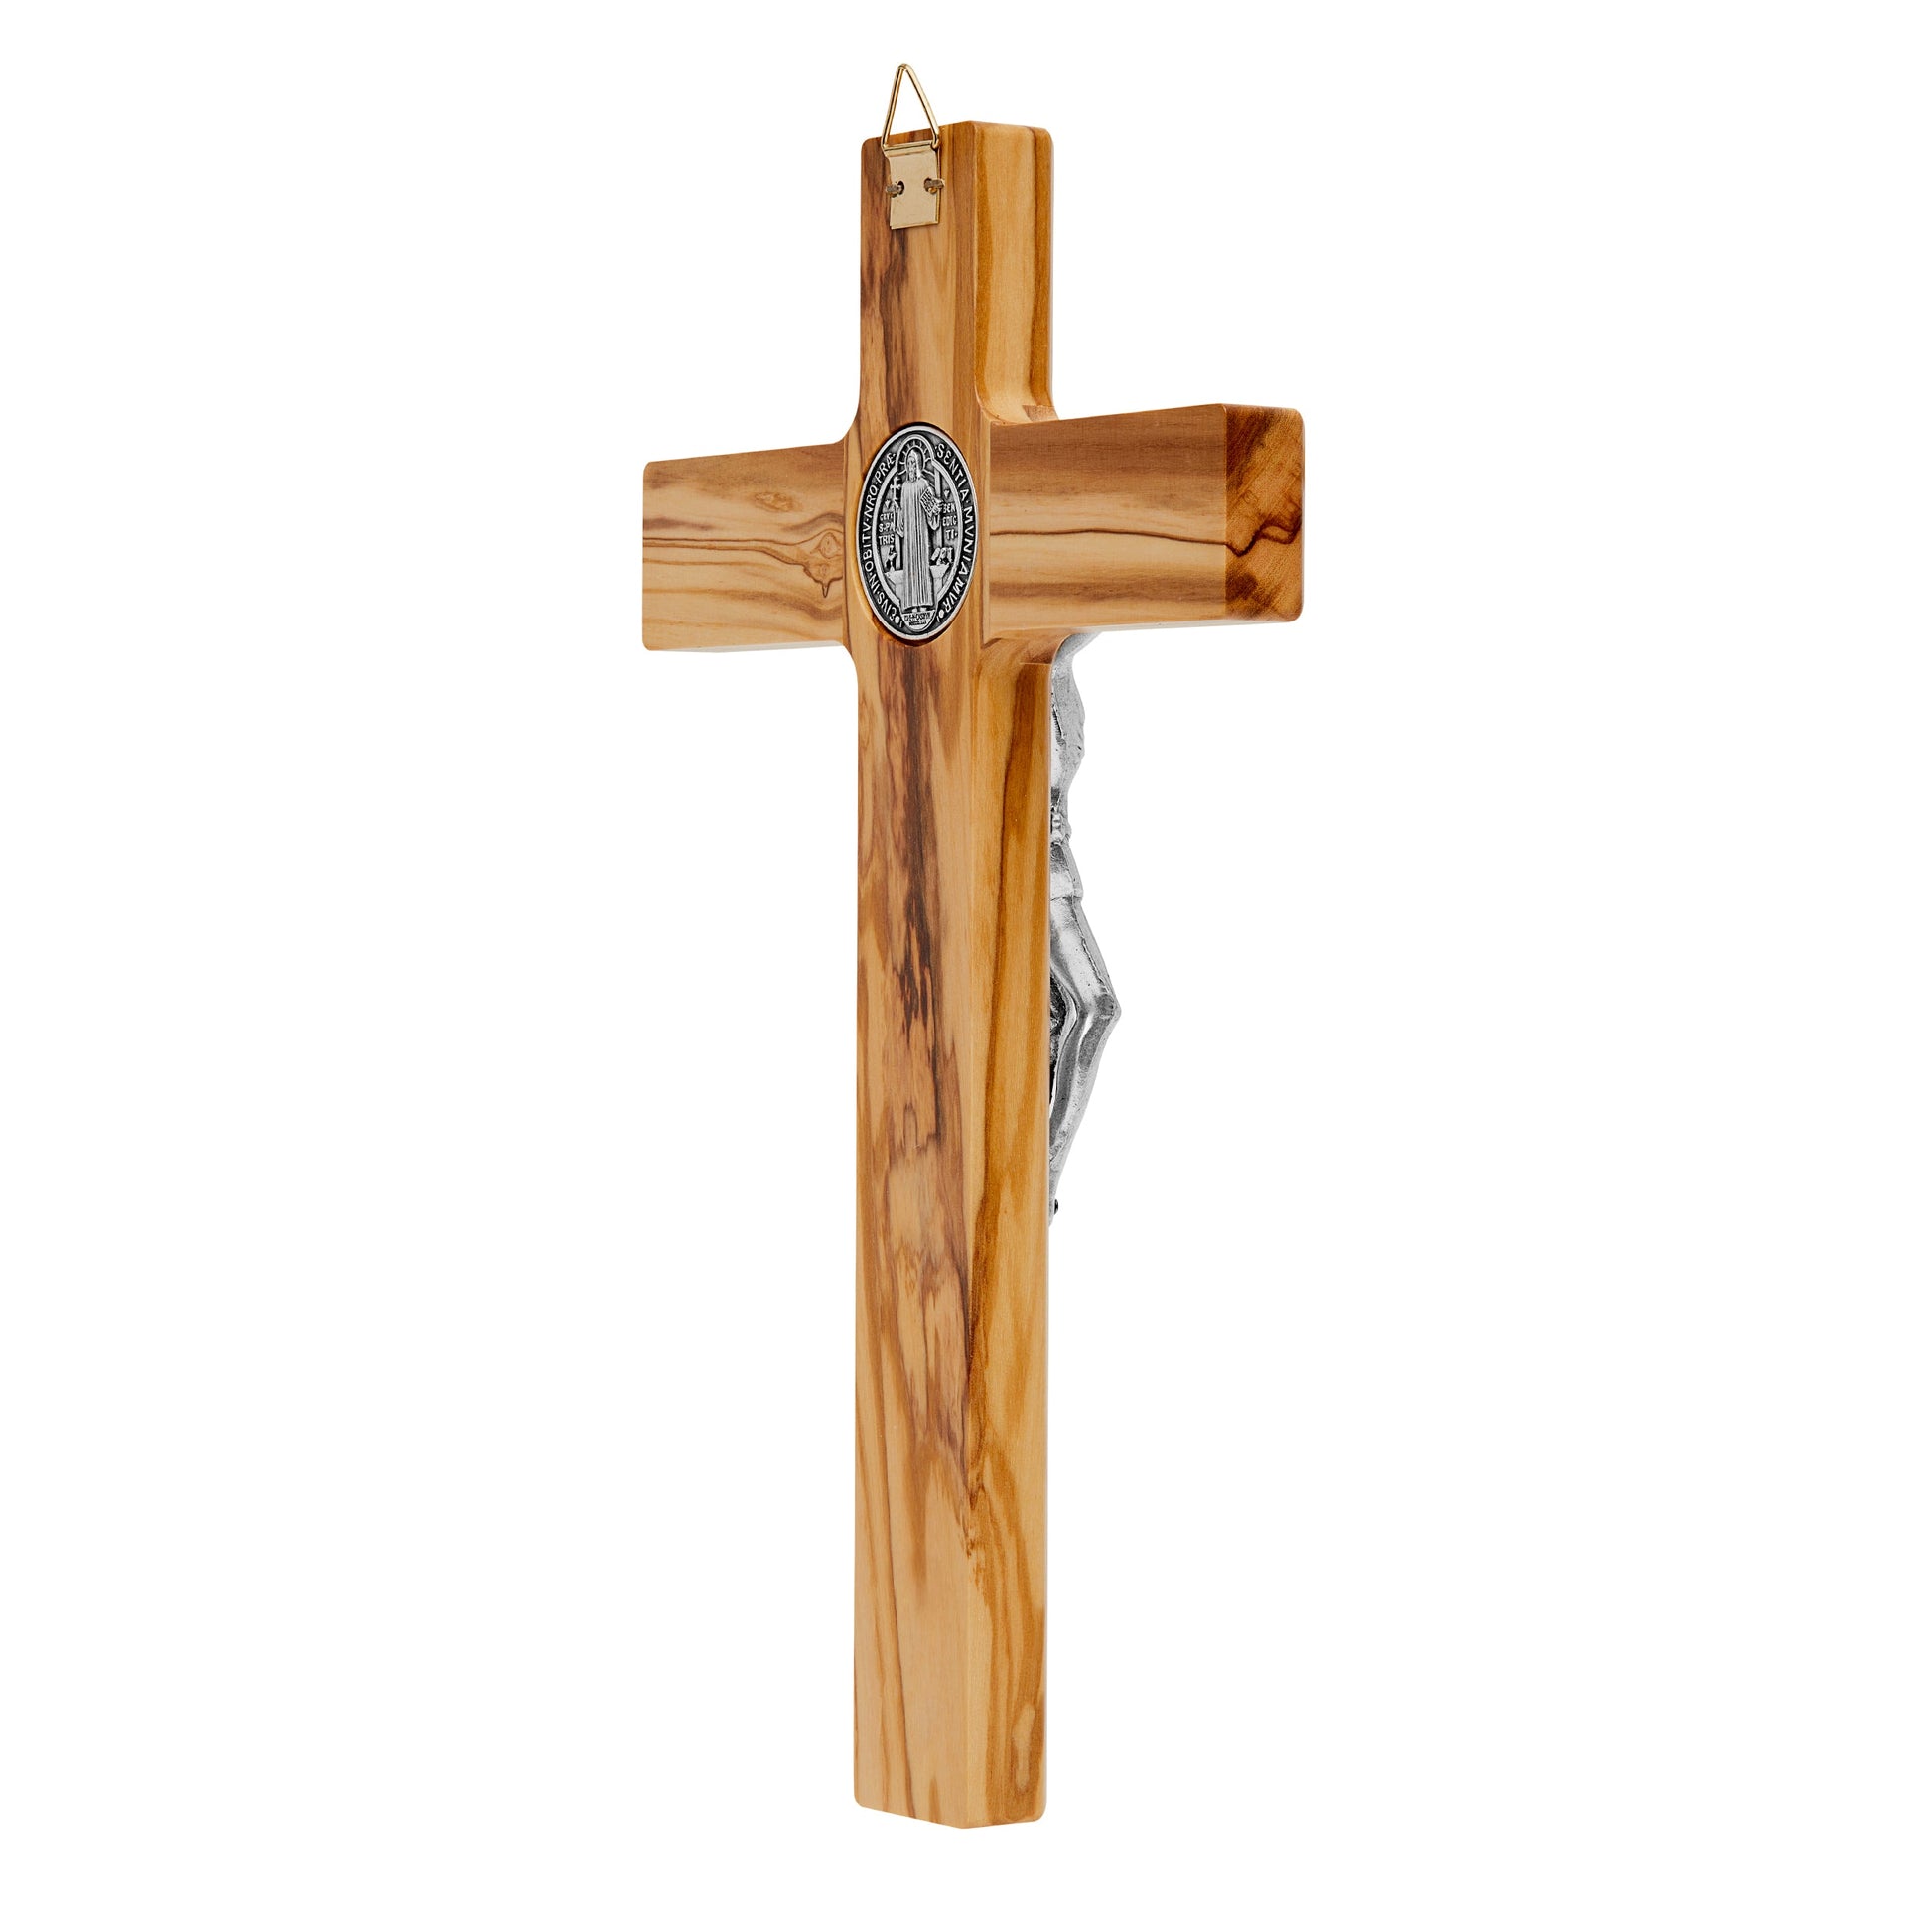 MONDO CATTOLICO 25 cm (9.84 in) Olive Wood St. Benedict Crucifix With Outlines